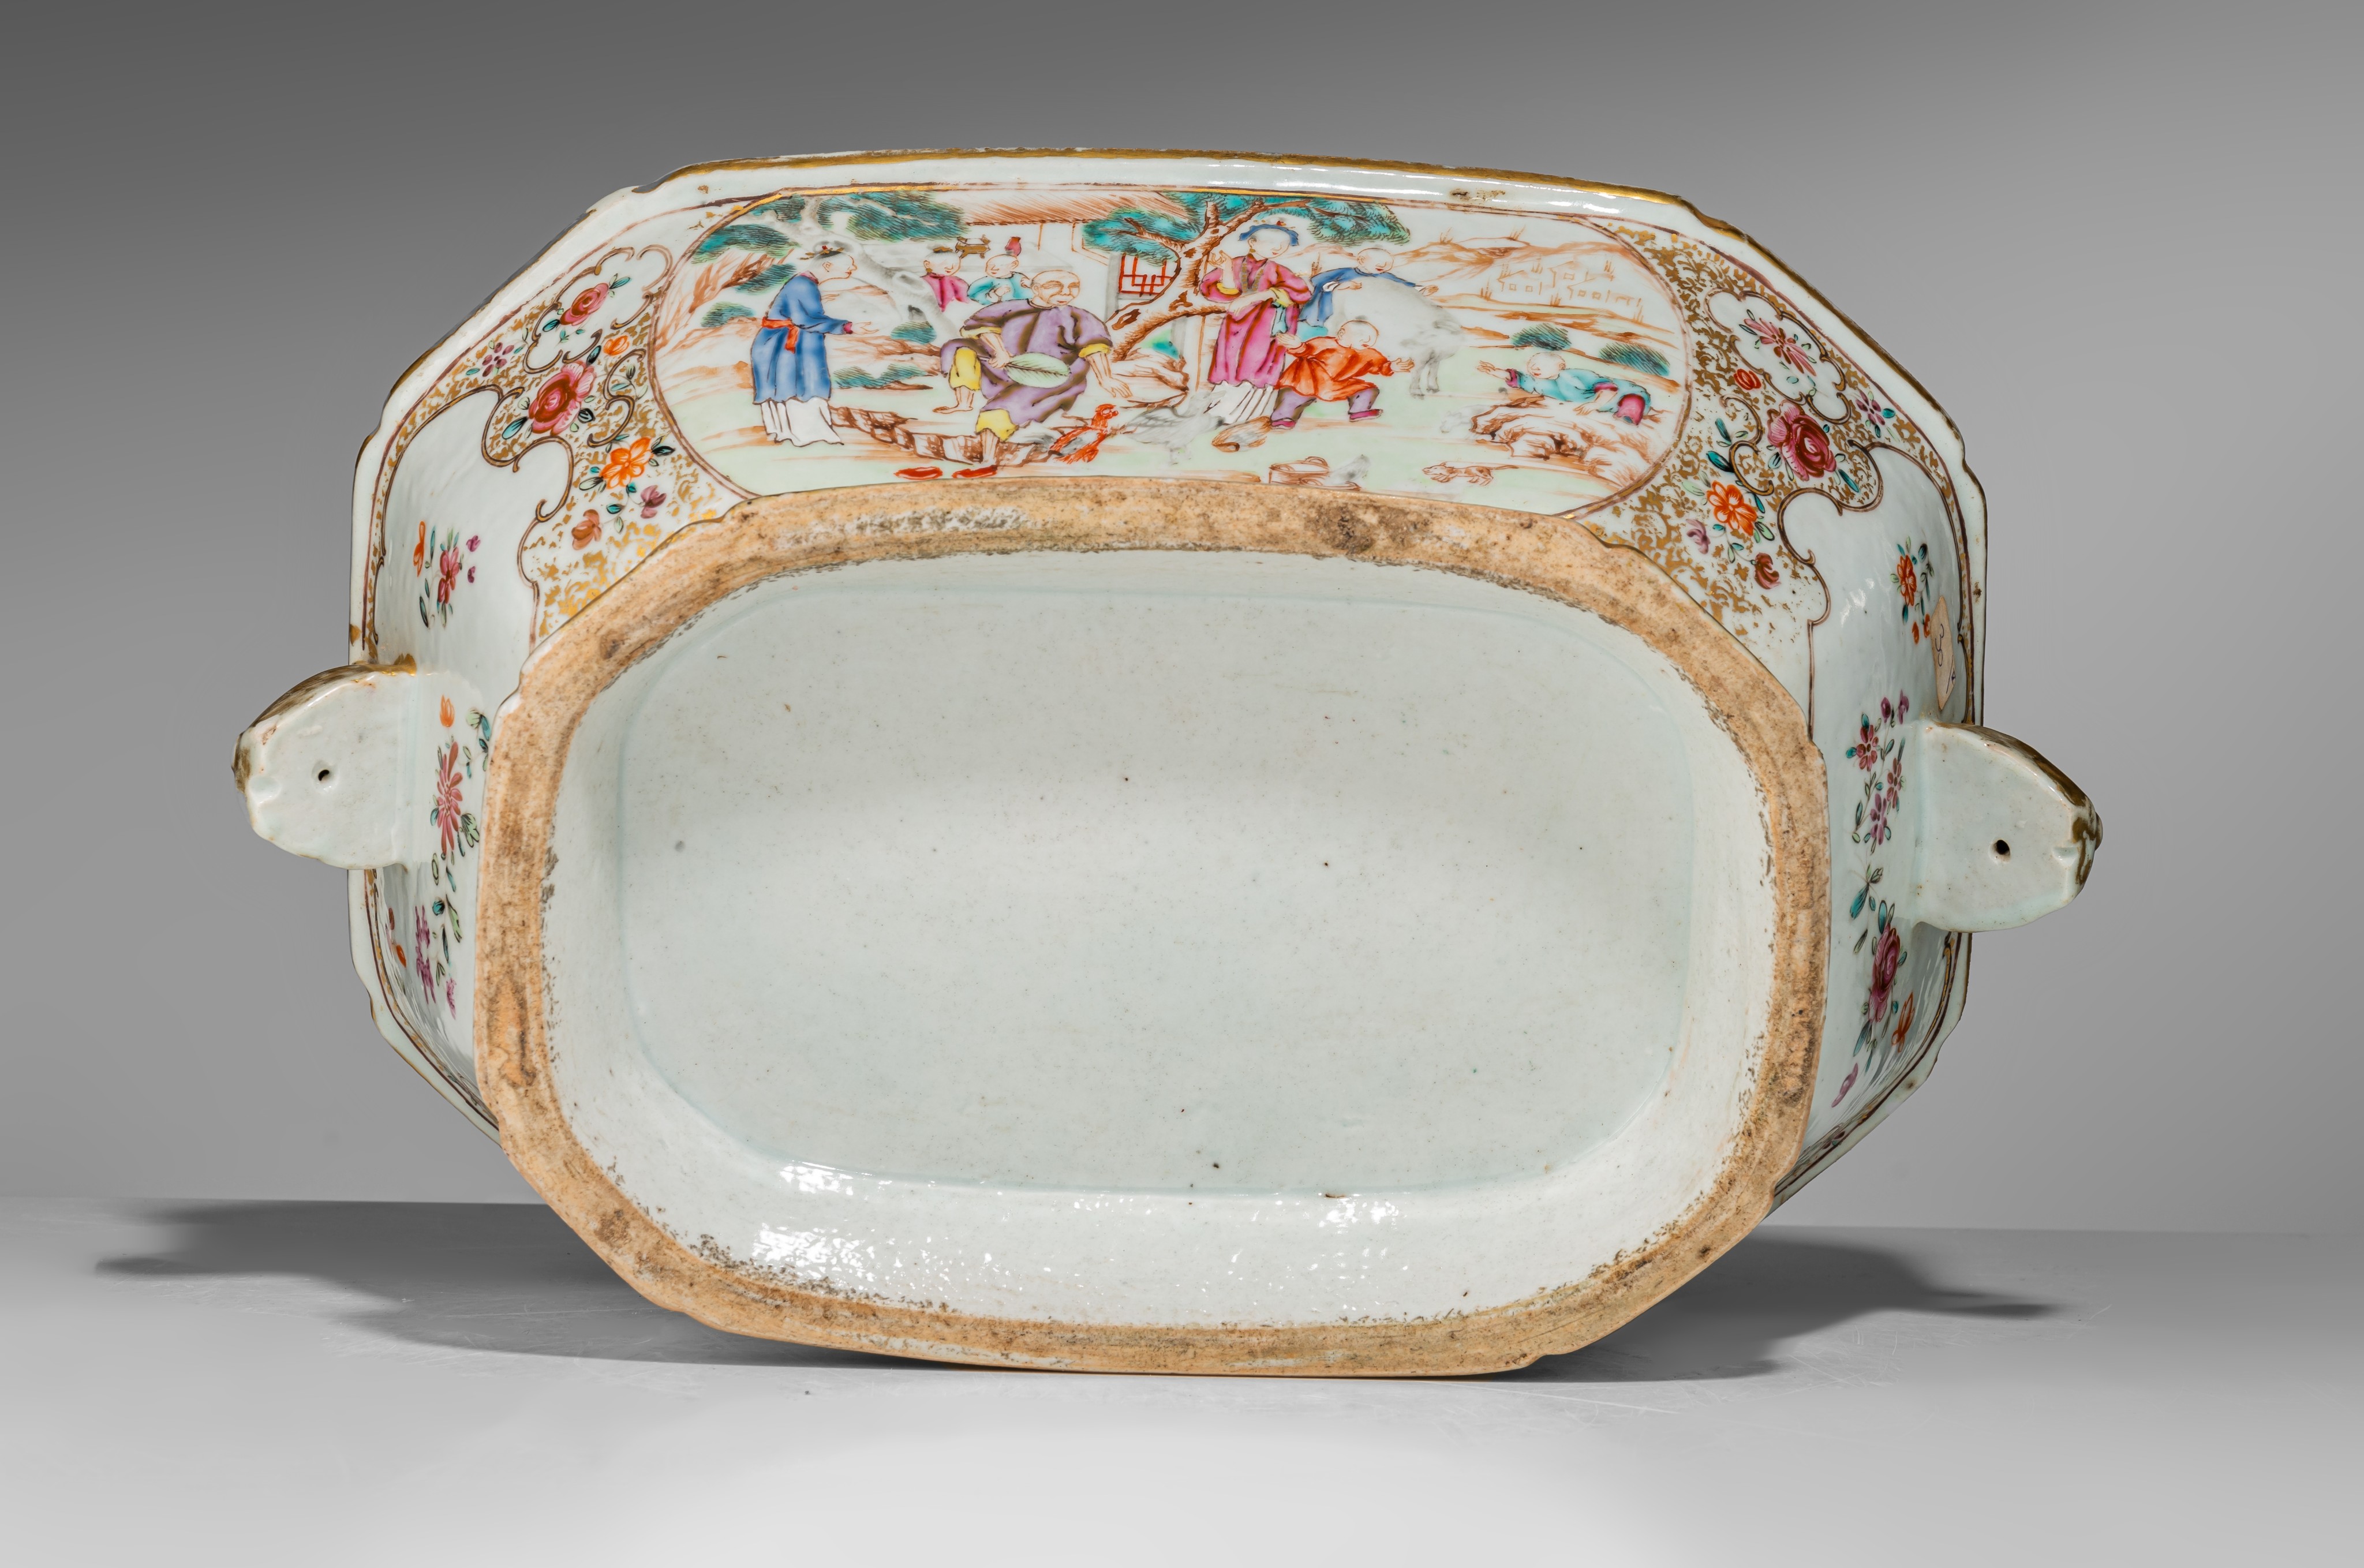 A collection of famille rose and gilt decorated export porcelain ware, 18thC, largest - H 12,5 - 34, - Image 13 of 20